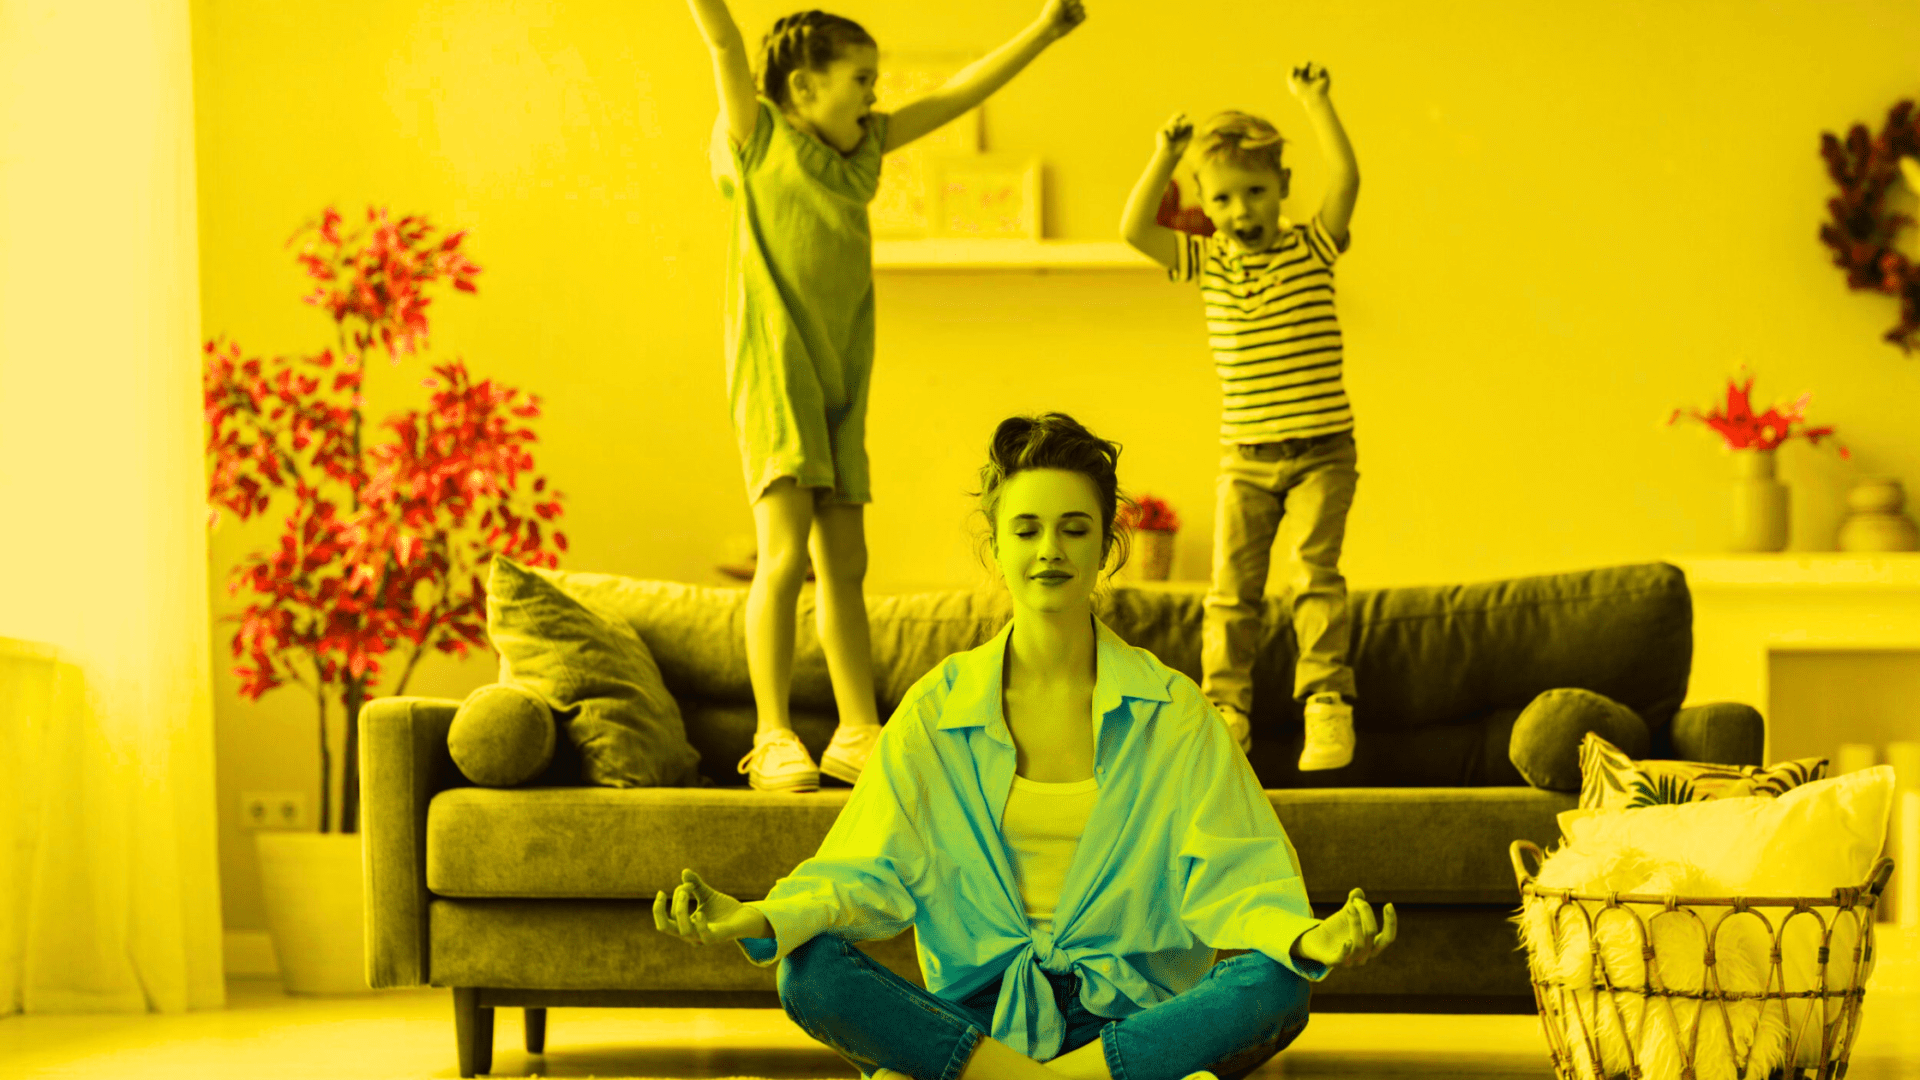 A woman meditating while a small girl and a boy jump on the couch